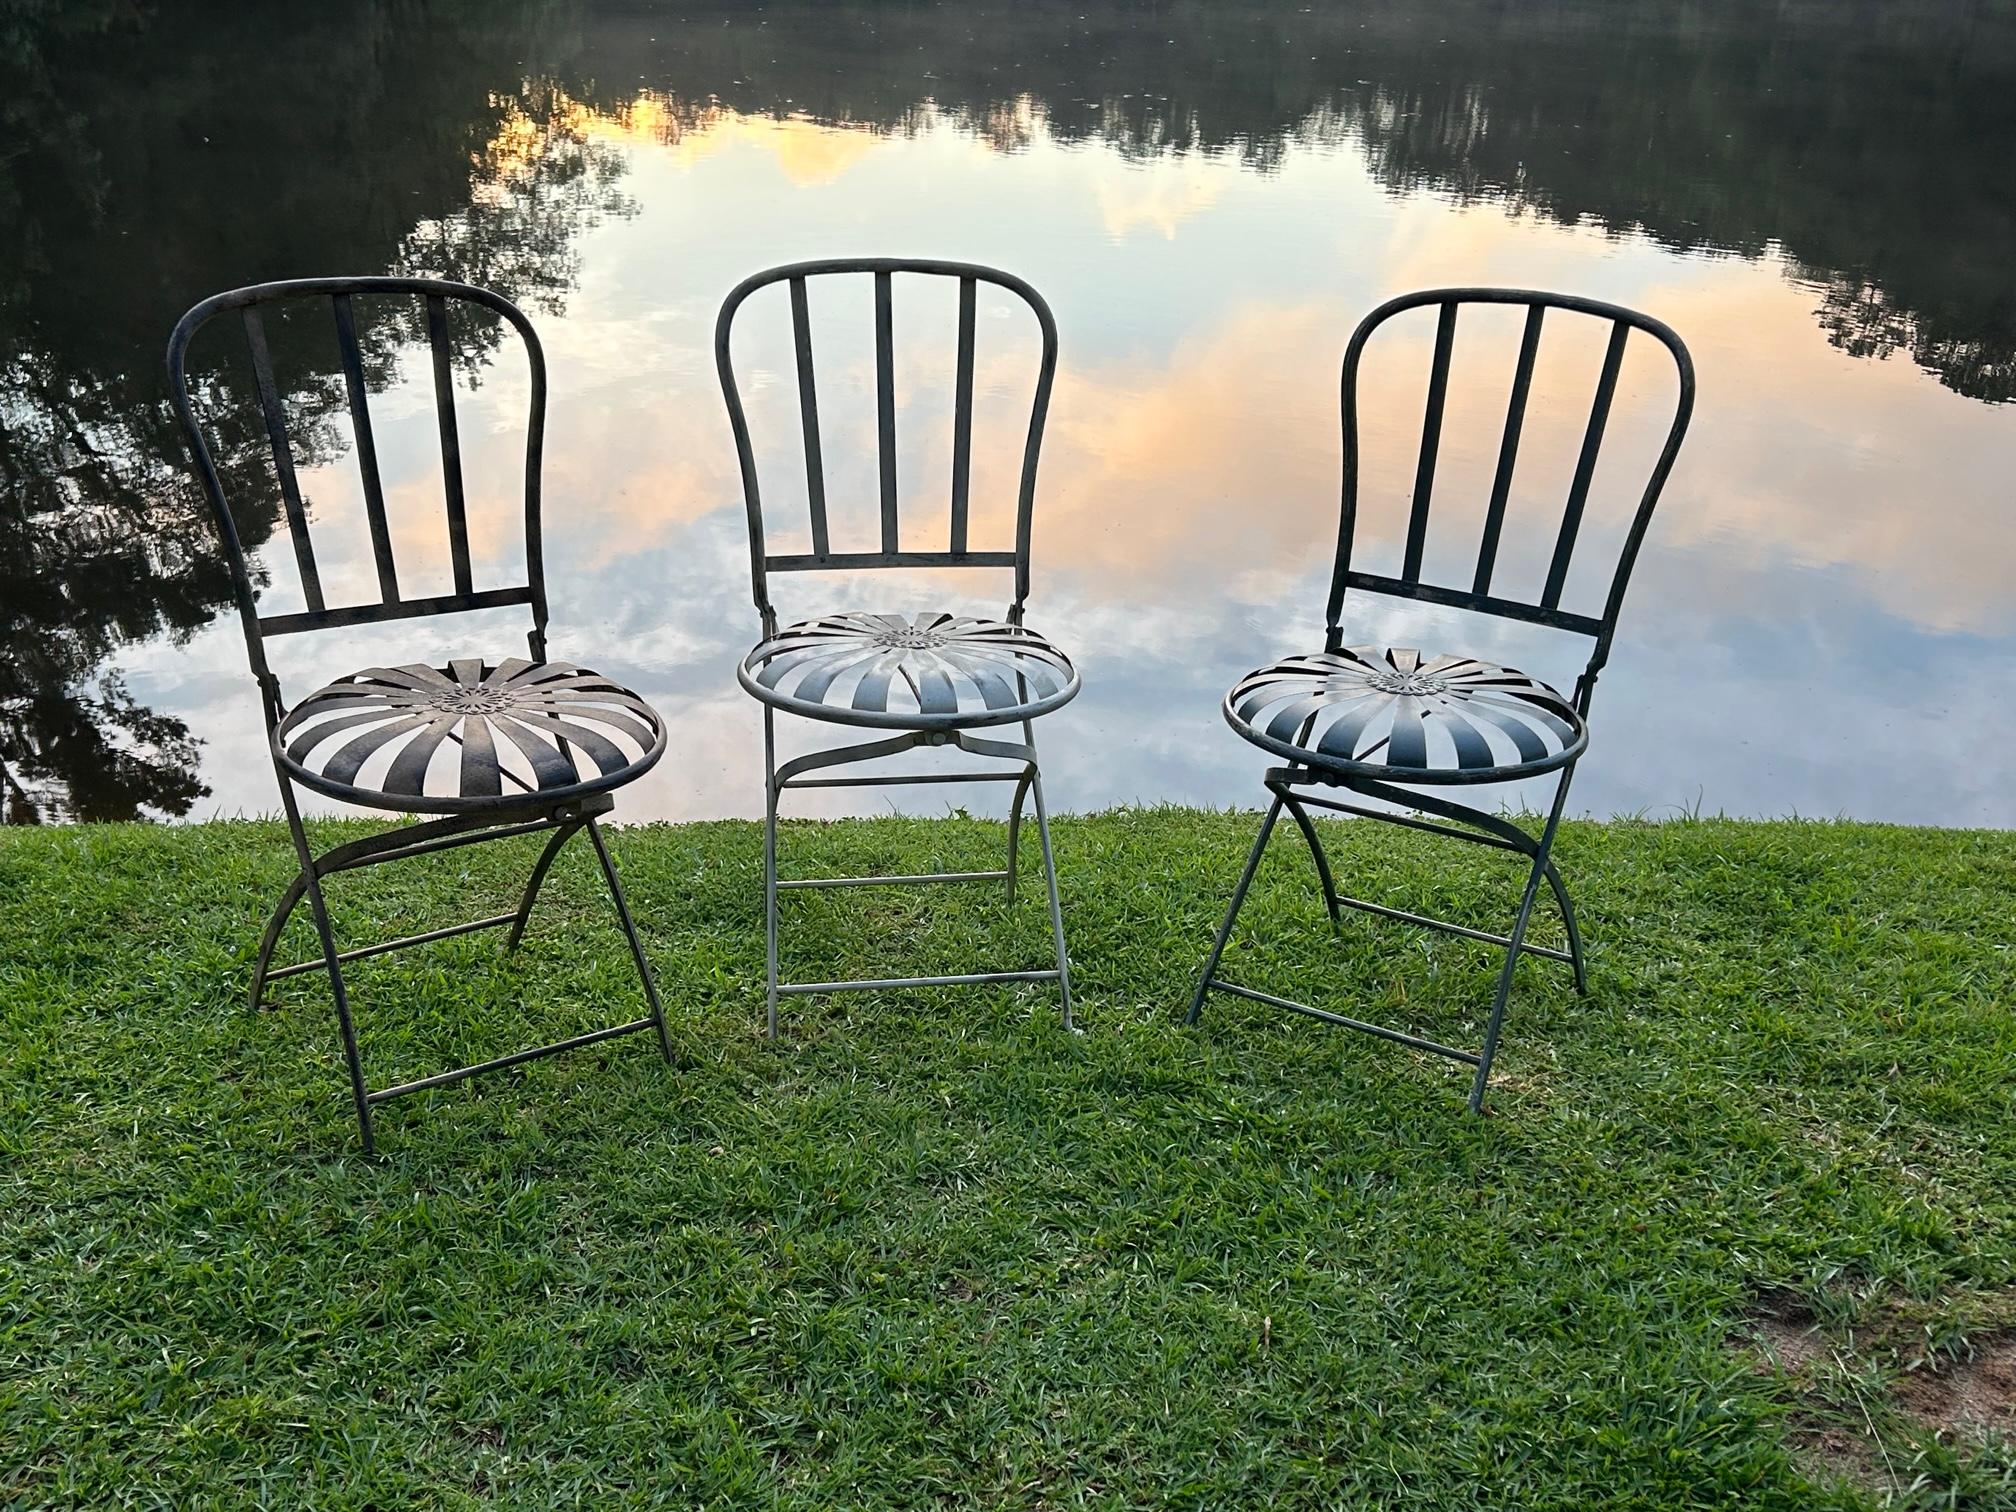 Incredible set of 3 Francois Carre folding chairs! These beauties are in excellent sitting/working condition and will grace any area. The folding mechanisms are all extremely smooth and the workmanship is fabulous. One in cream, one in grey, and one